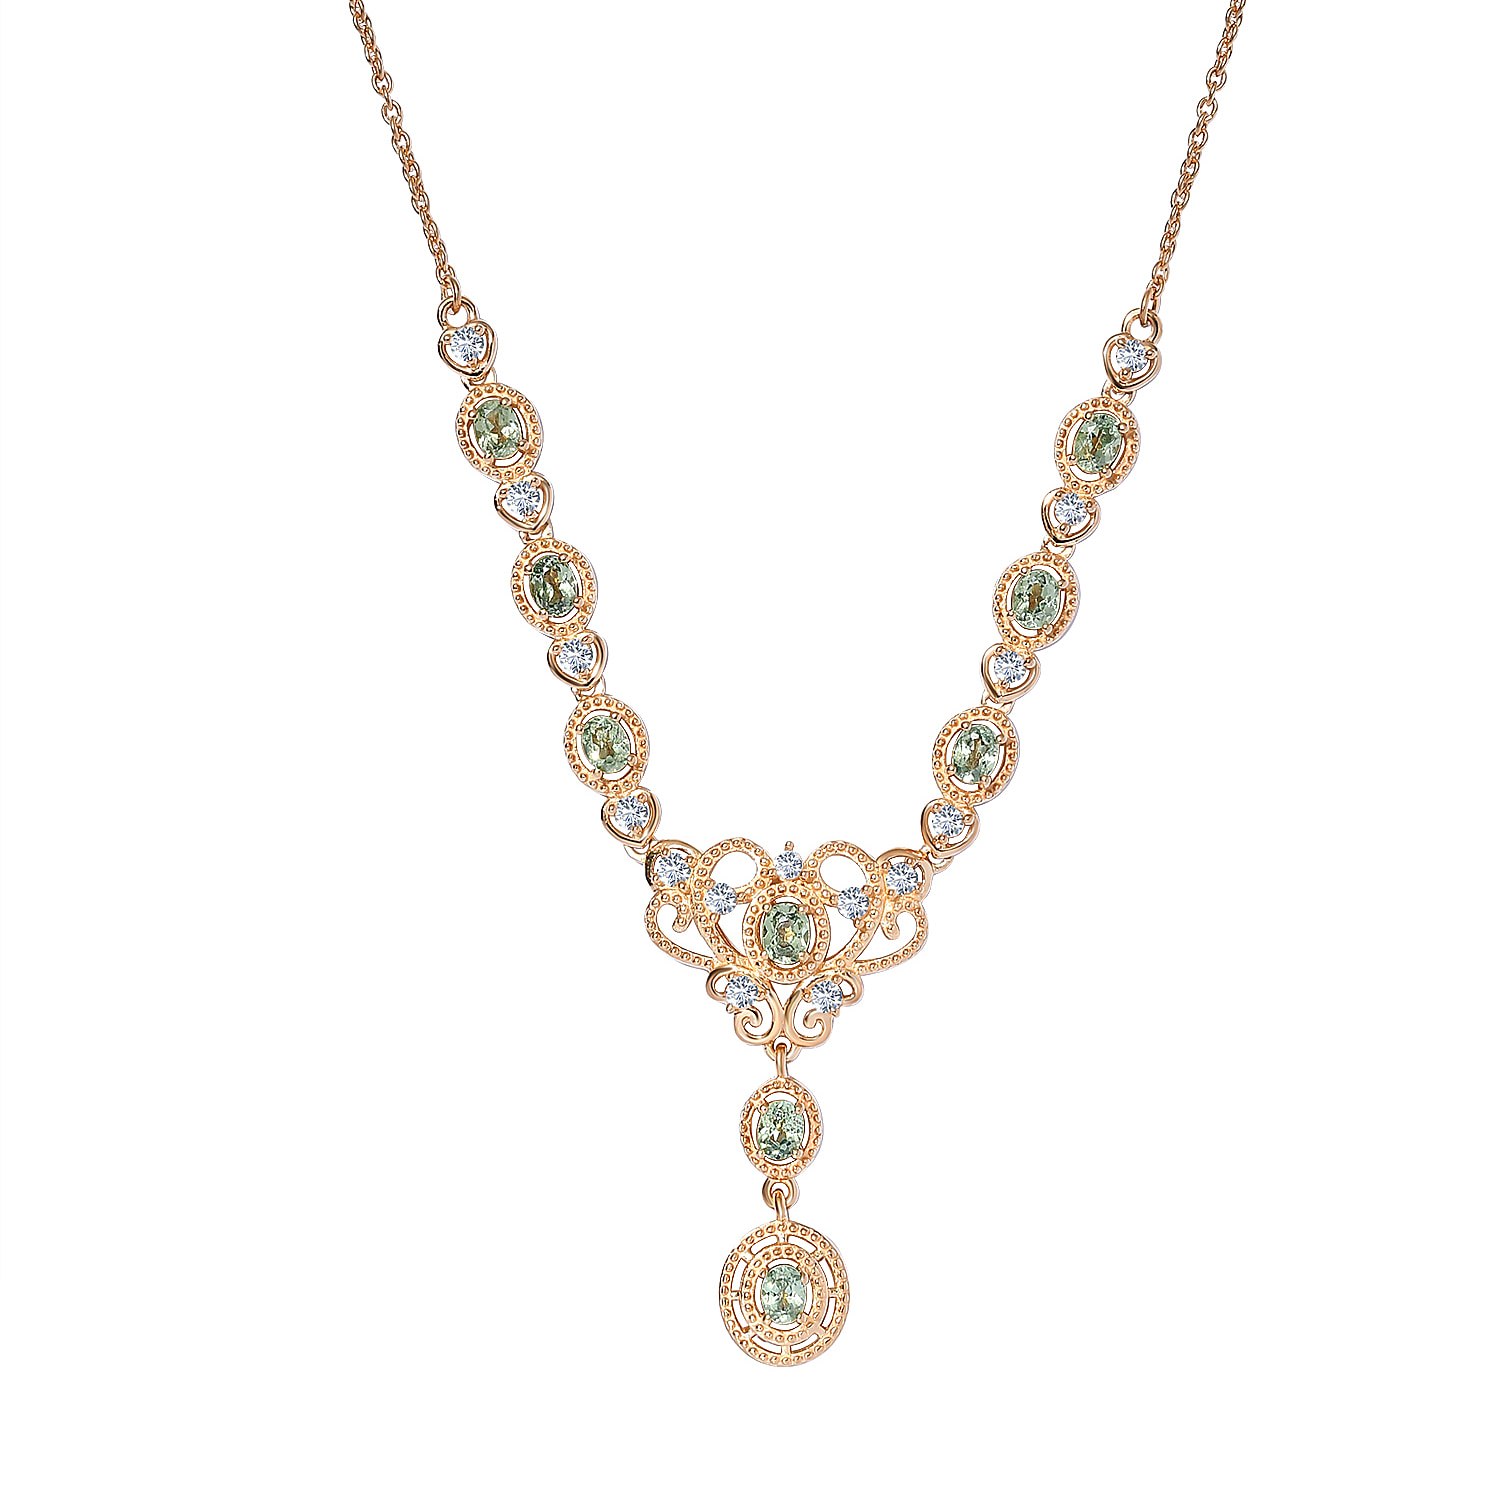 Buy KARIS Cambodian Blue Zircon Sagittarius Zodiac Pendant Necklace 20  Inches in 18K YG Plated and ION Plated YG Stainless Steel 0.05 ctw at  ShopLC.